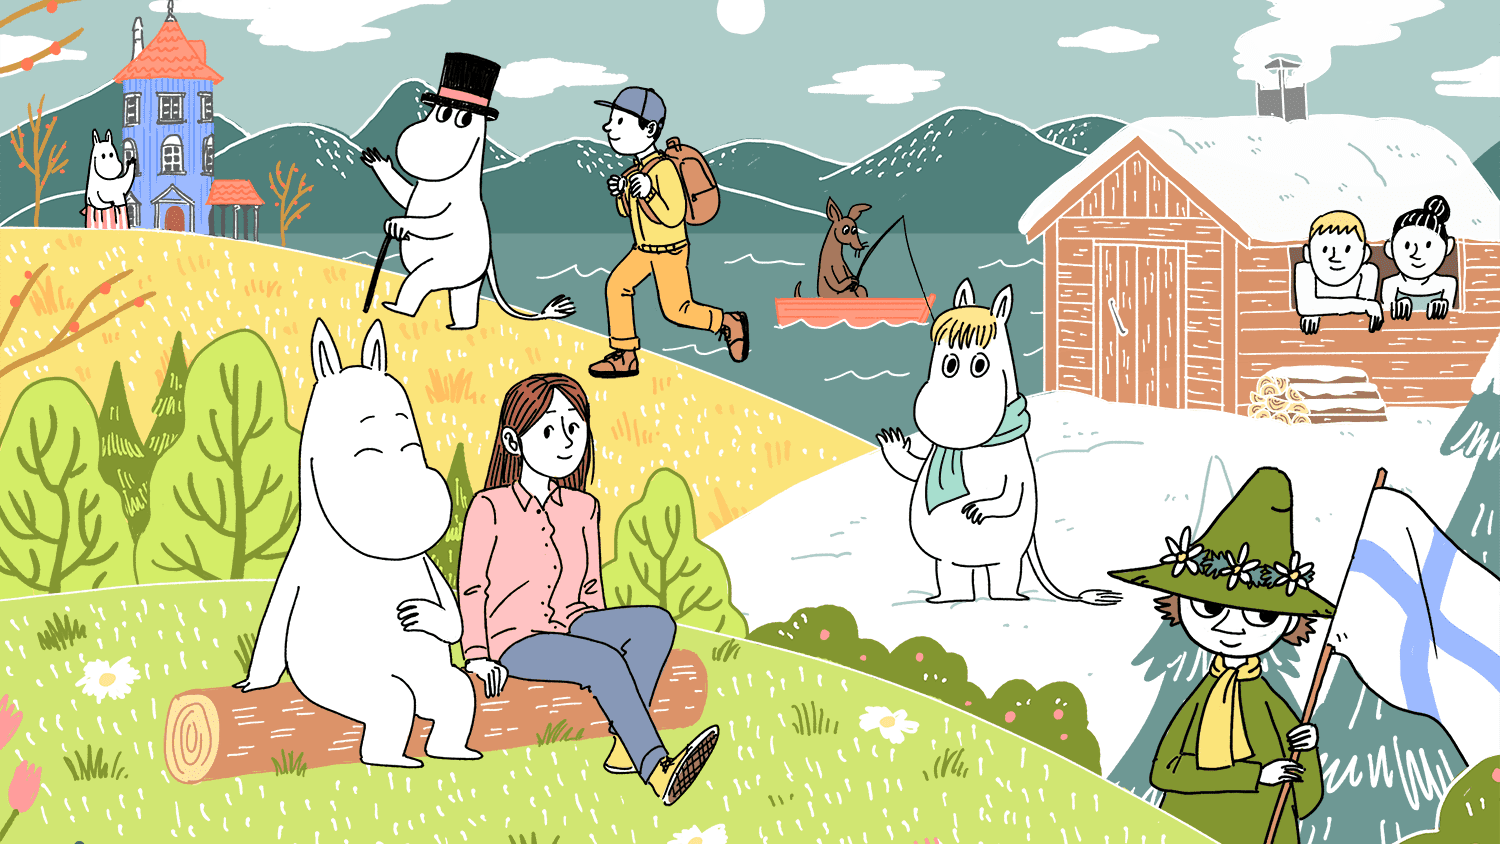 What the Moomins Can Teach Us About Finland